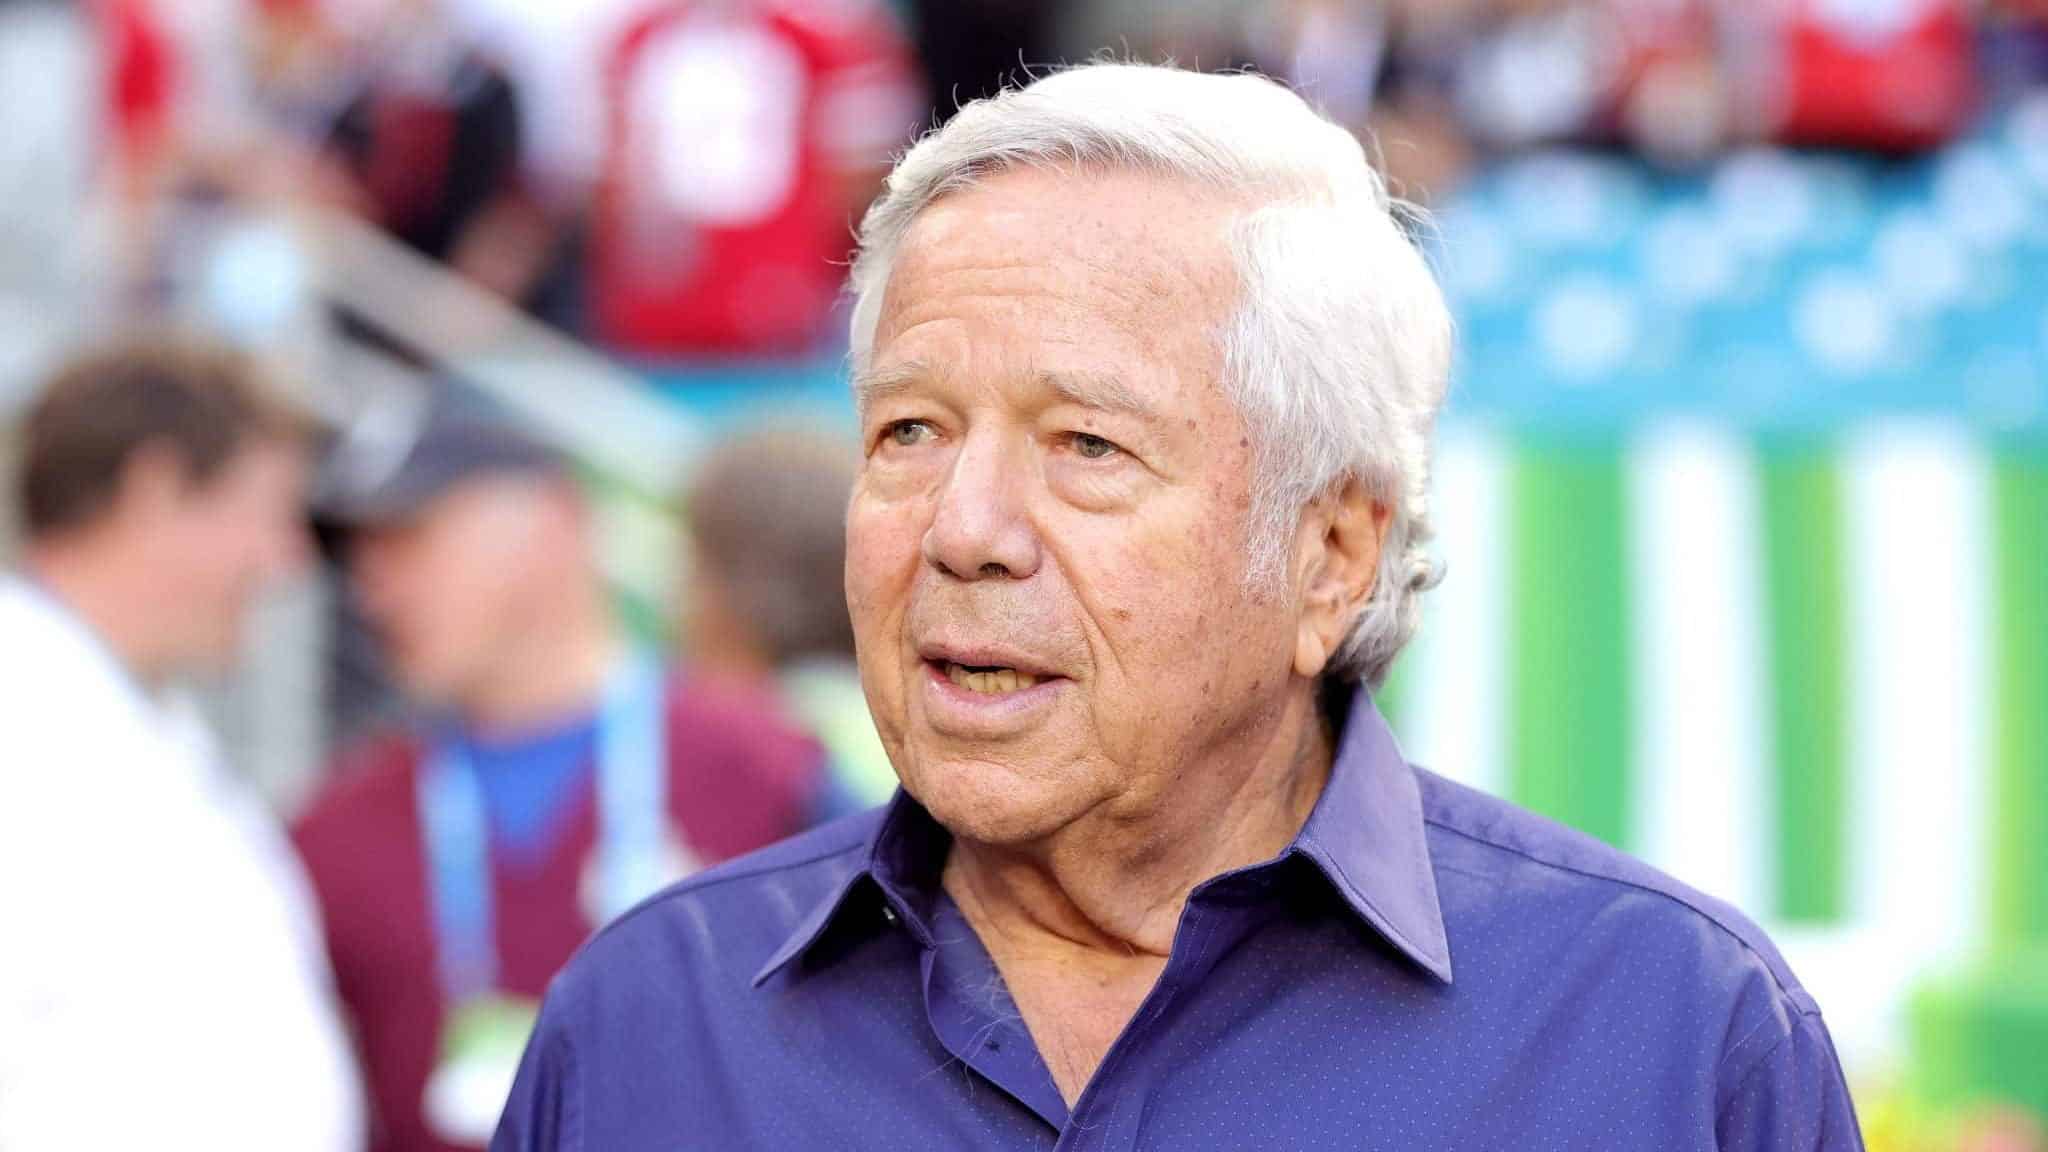 MIAMI, FLORIDA - FEBRUARY 02: New England Patriots owner Robert Kraft looks on prior to Super Bowl LIV between the San Francisco 49ers and the Kansas City Chiefs at Hard Rock Stadium on February 02, 2020 in Miami, Florida. New York Mets